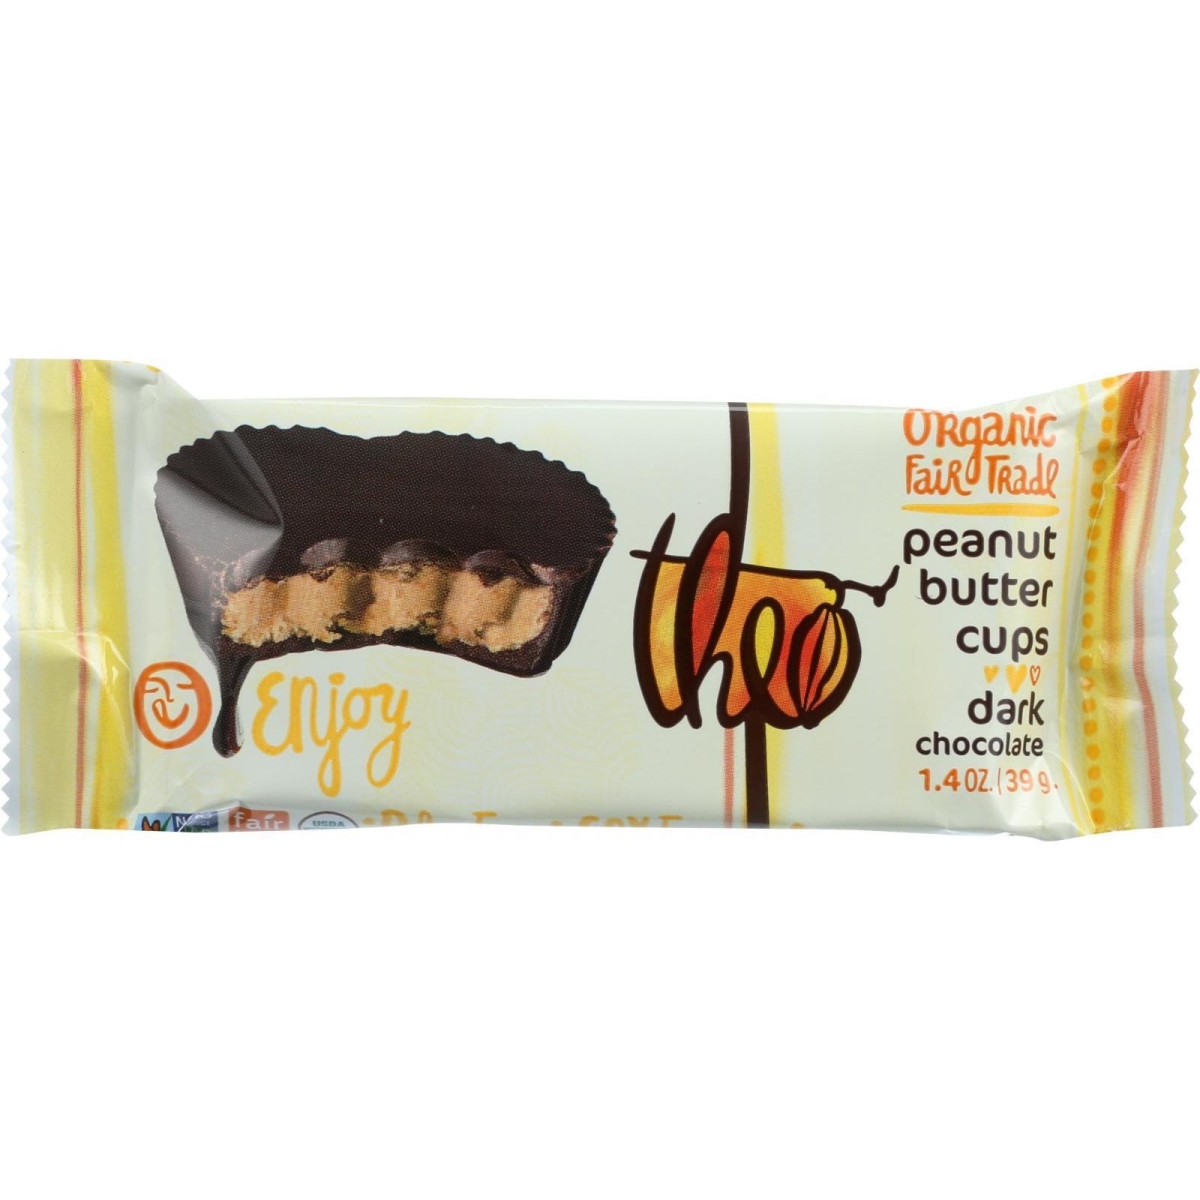 Picture of Theo Chocolate 1573963 1.3 oz Peanut Butter Cups - Dark Chocolate